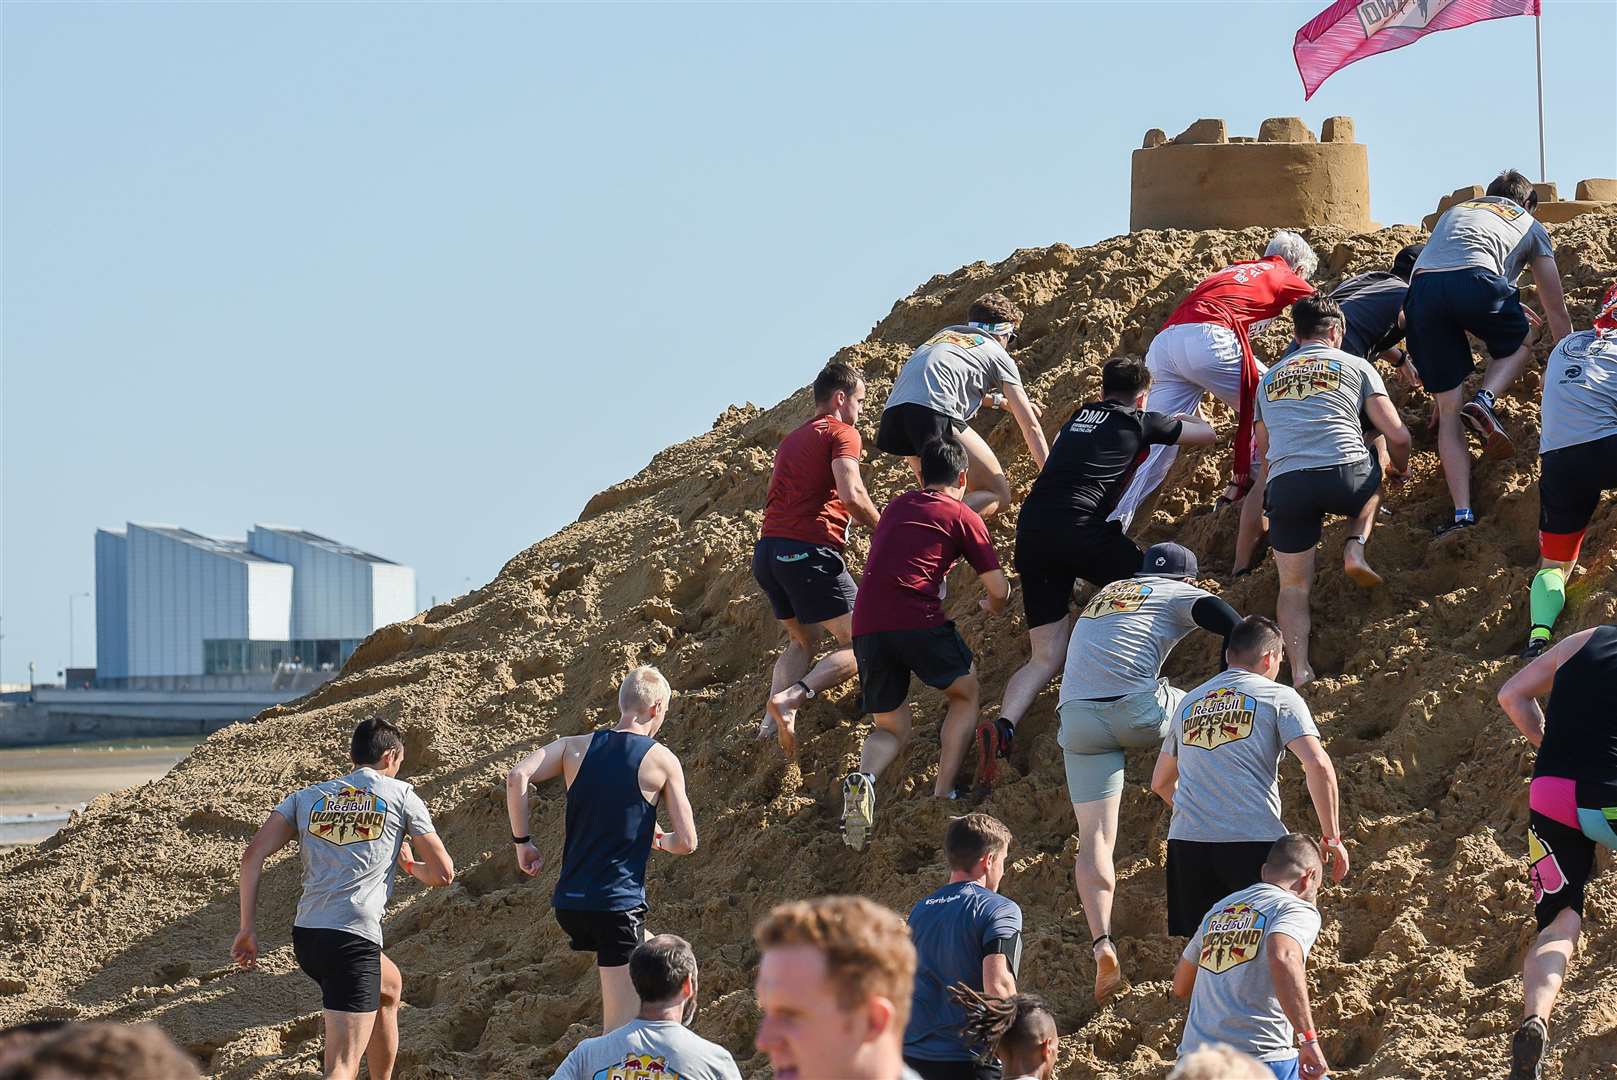 The race is described as the 'world's most gruelling mile race'